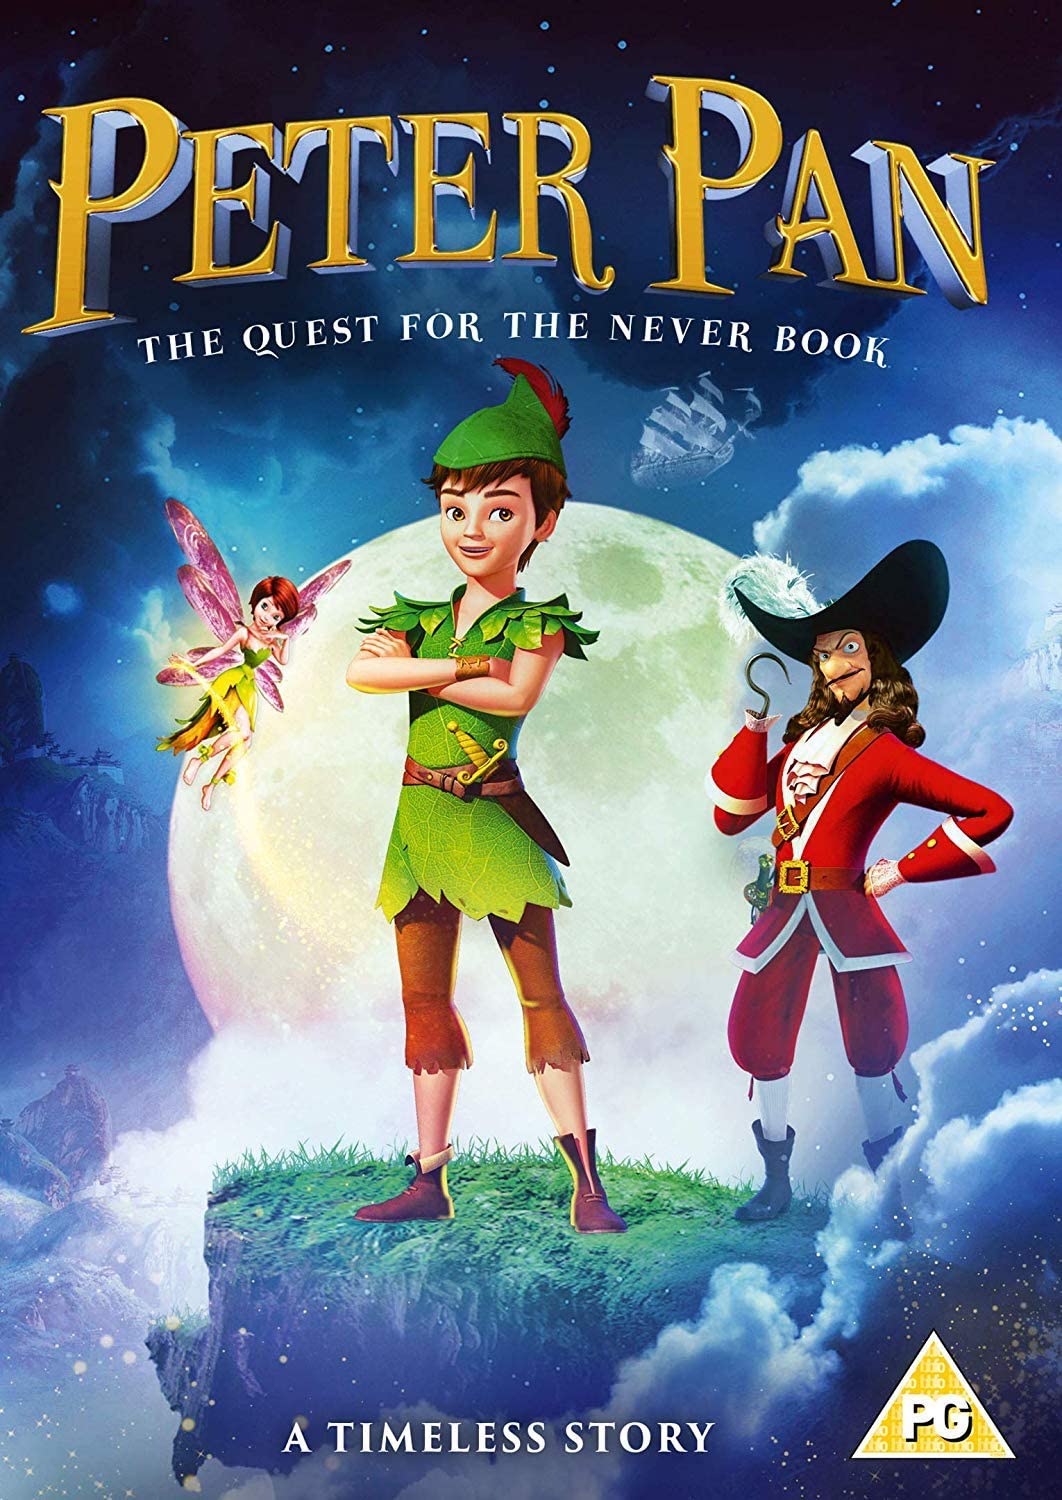 Peter Pan: The Quest for the Never Book - Fantasy [DVD]